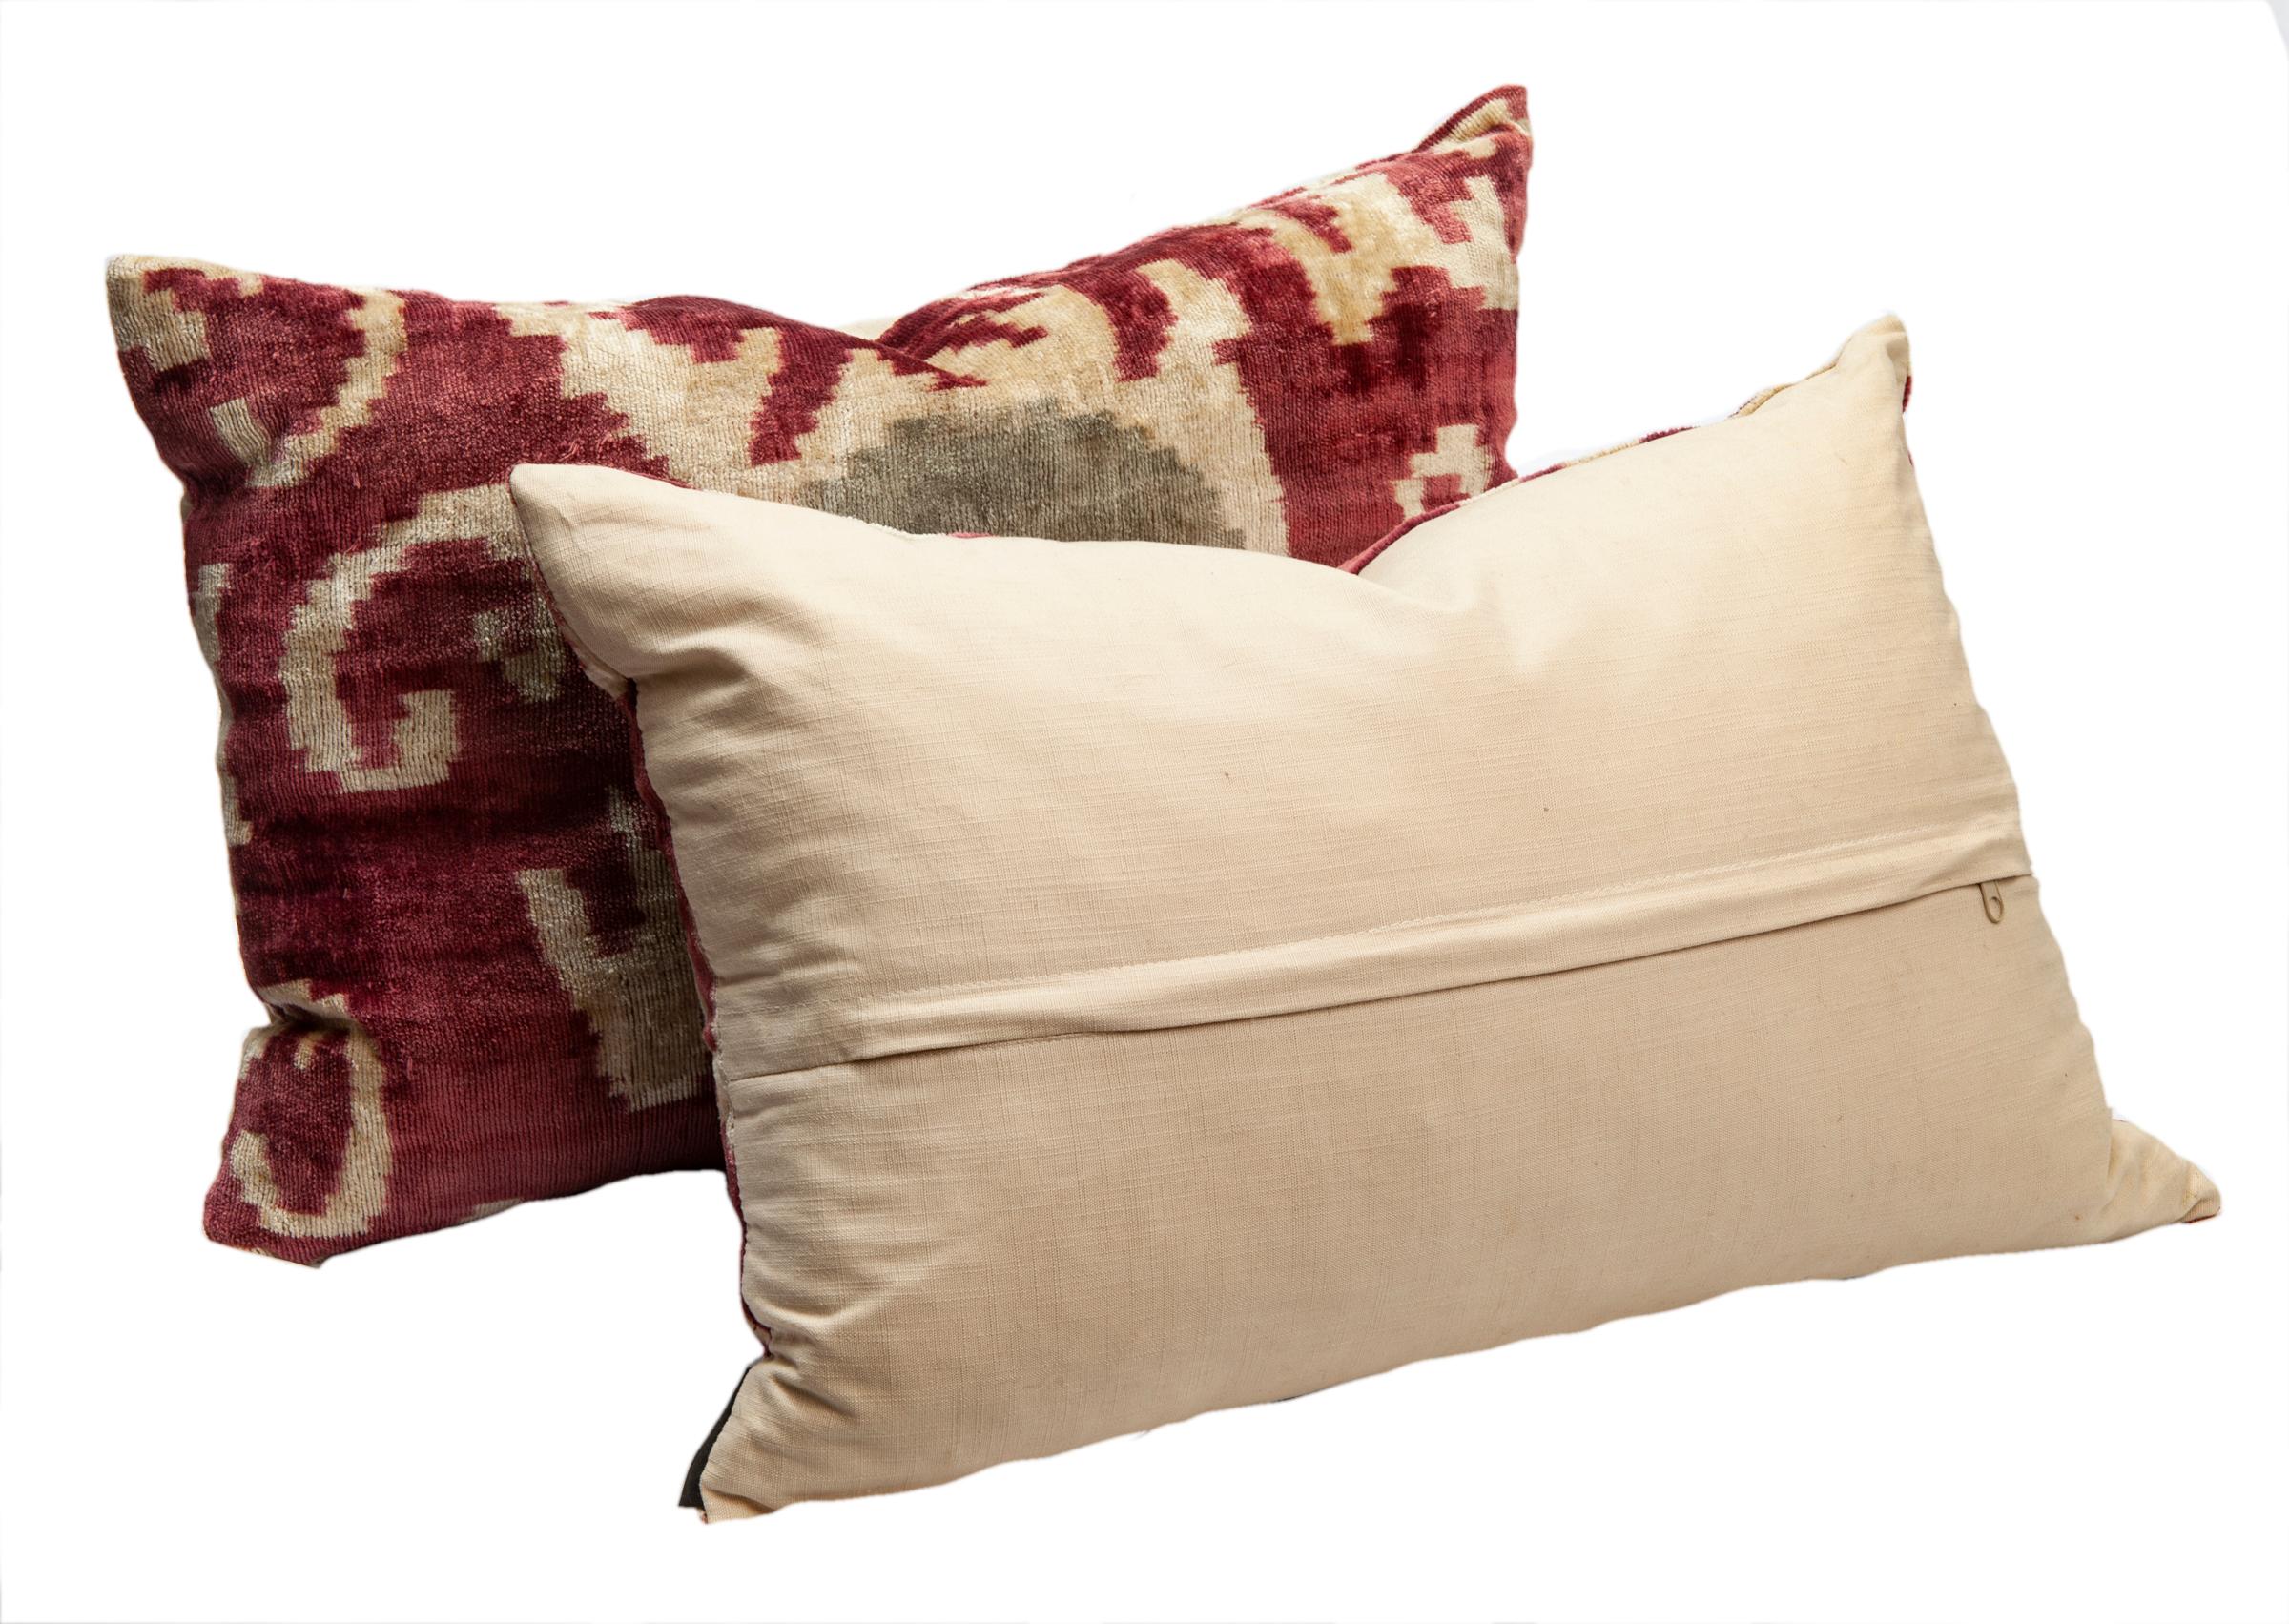 Mekhann Iktat Lombard Pillow Pair from Turkey made of imported silk with feather down insert.
Mekhann was established in 2012 to bring a contemporary outlook to a tradition Turkish textiles uniting hand crafted techniques spanning two millennia with